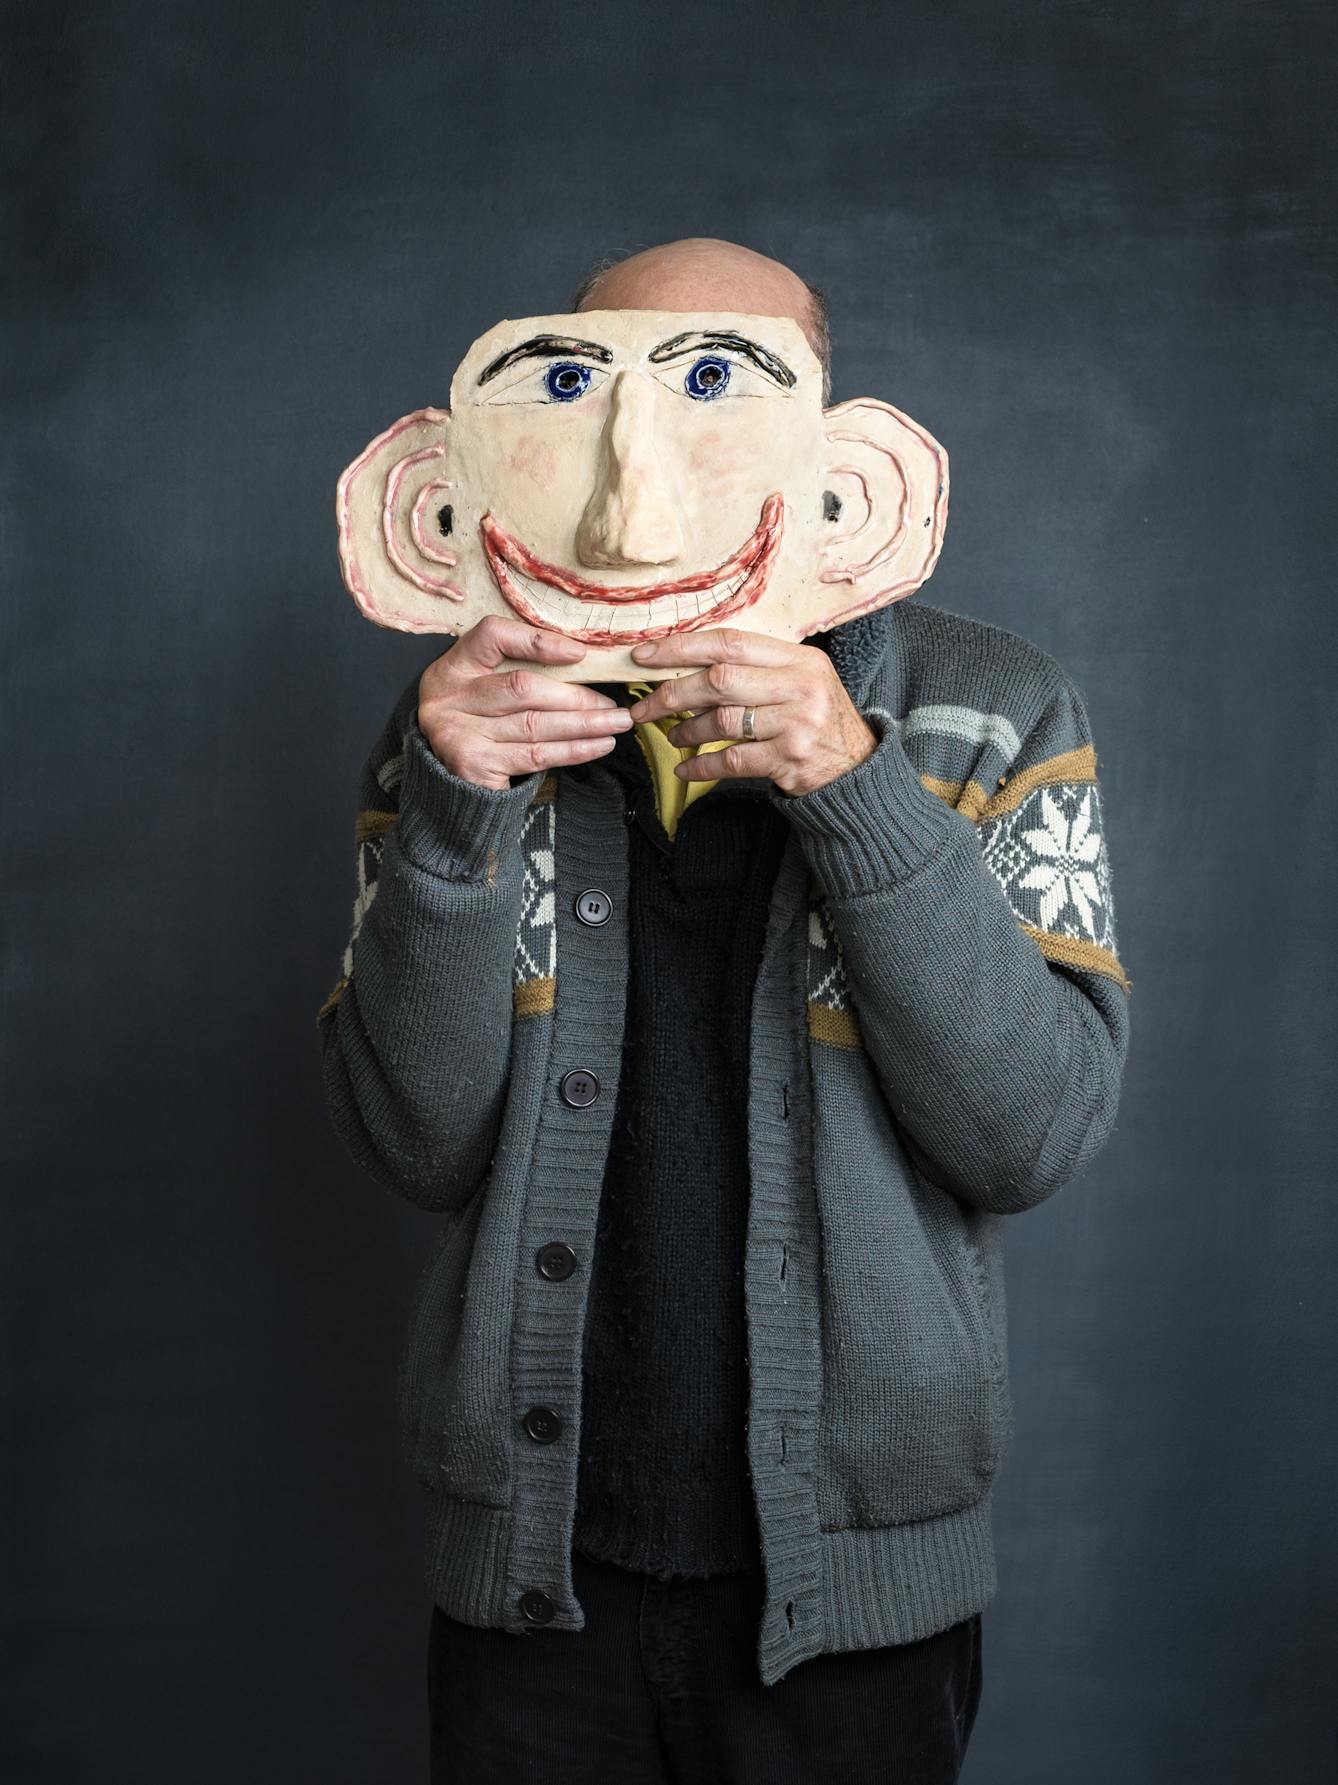 Photograph of stroke survivor and artist Chris Miller in an artist studio. A grey textured background frames the artist as he holds a ceramic of a head, which acts as a cartoon likeness of his own face and which obscures his own face. 